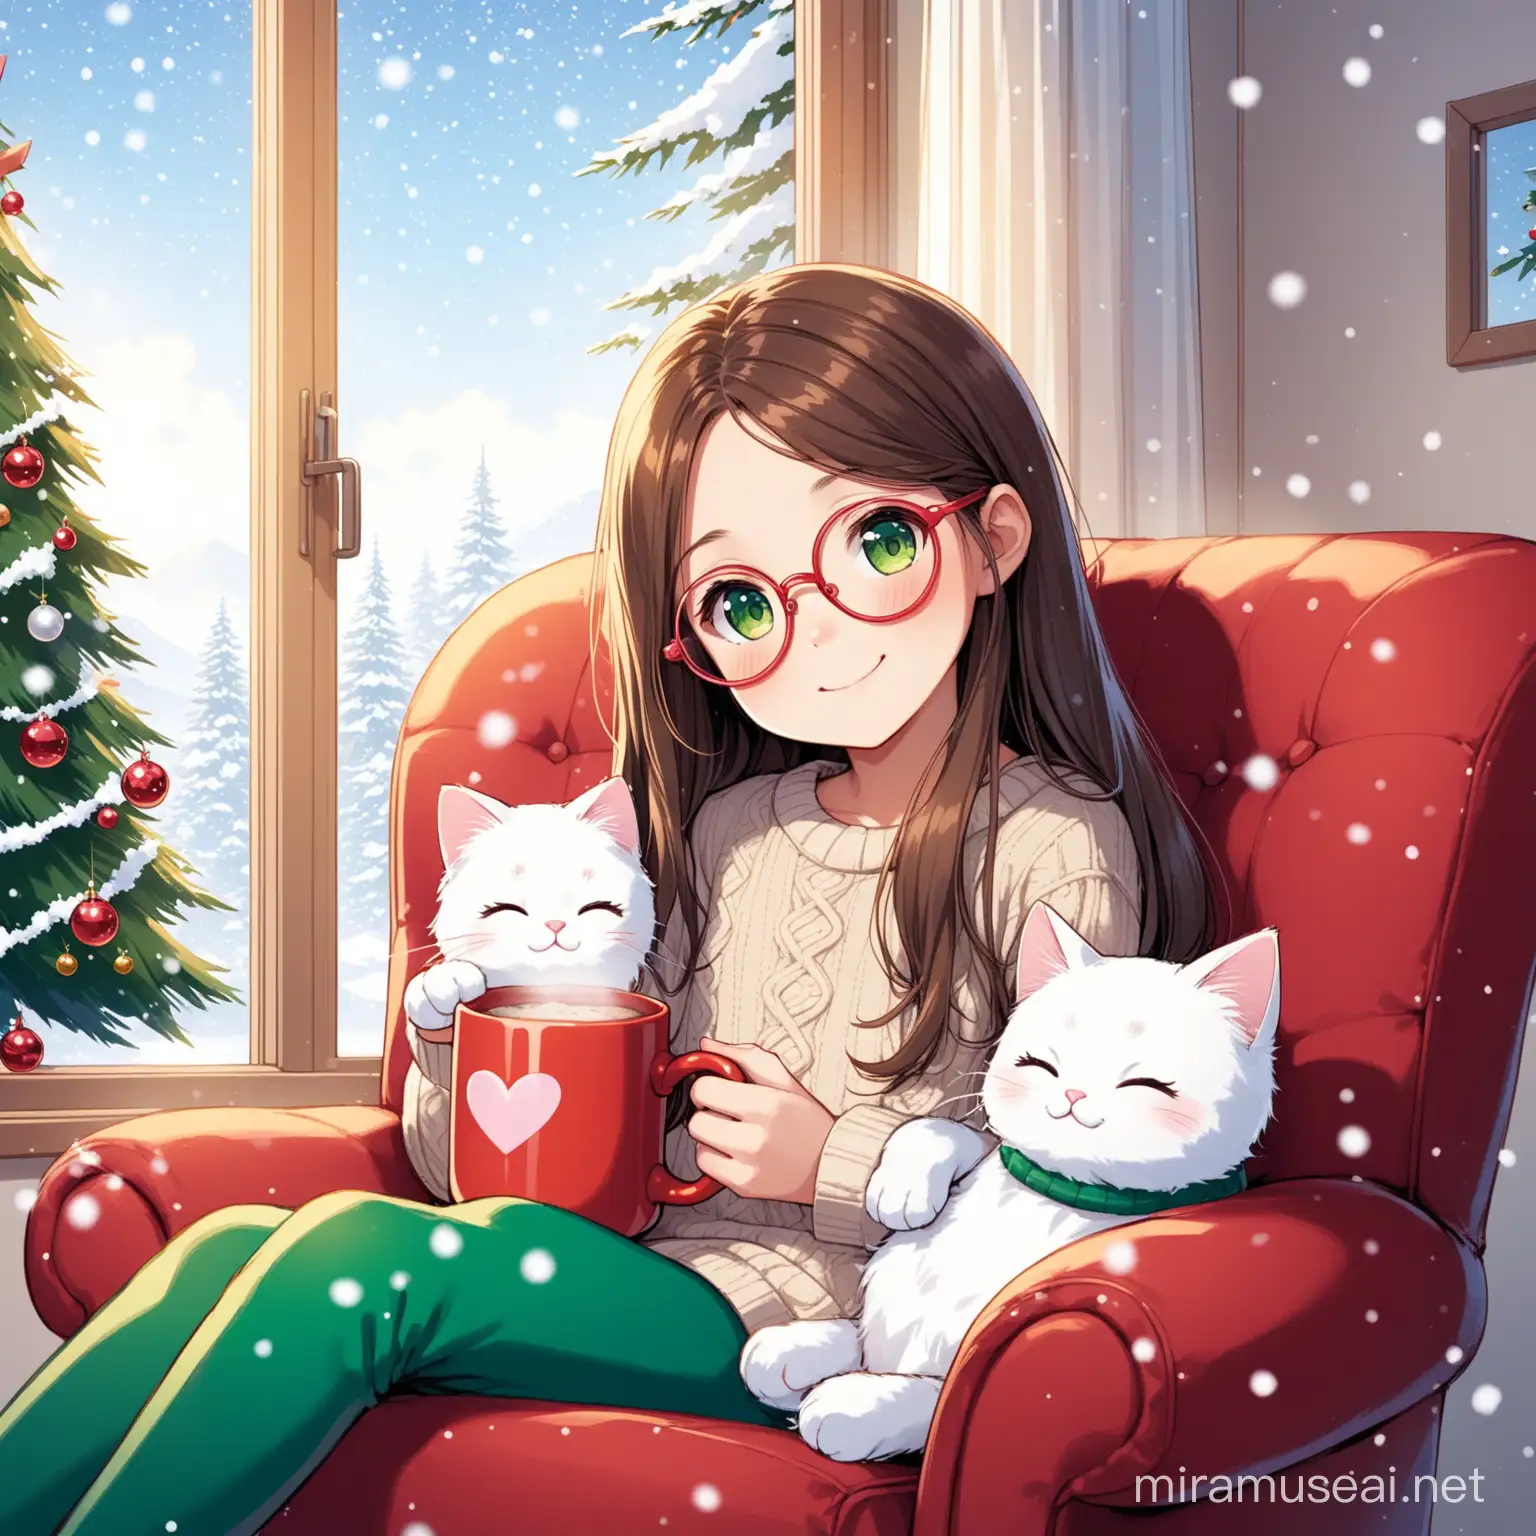 11 year old girl, long brown hair down, sitting next to a window, snowing outside, sitting in a patchwork arm chair, green eyes, blue round glasses,        wearing a beige jumper with a white heart in the front, a ragdoll cat sleeping on her lap, a mug of hot chocolate  with pink and white marshmallows floating on top on the arm chair, a red book with the words Christmas holidays on the front on the arm chair, white wall, smiling, looking out the window,